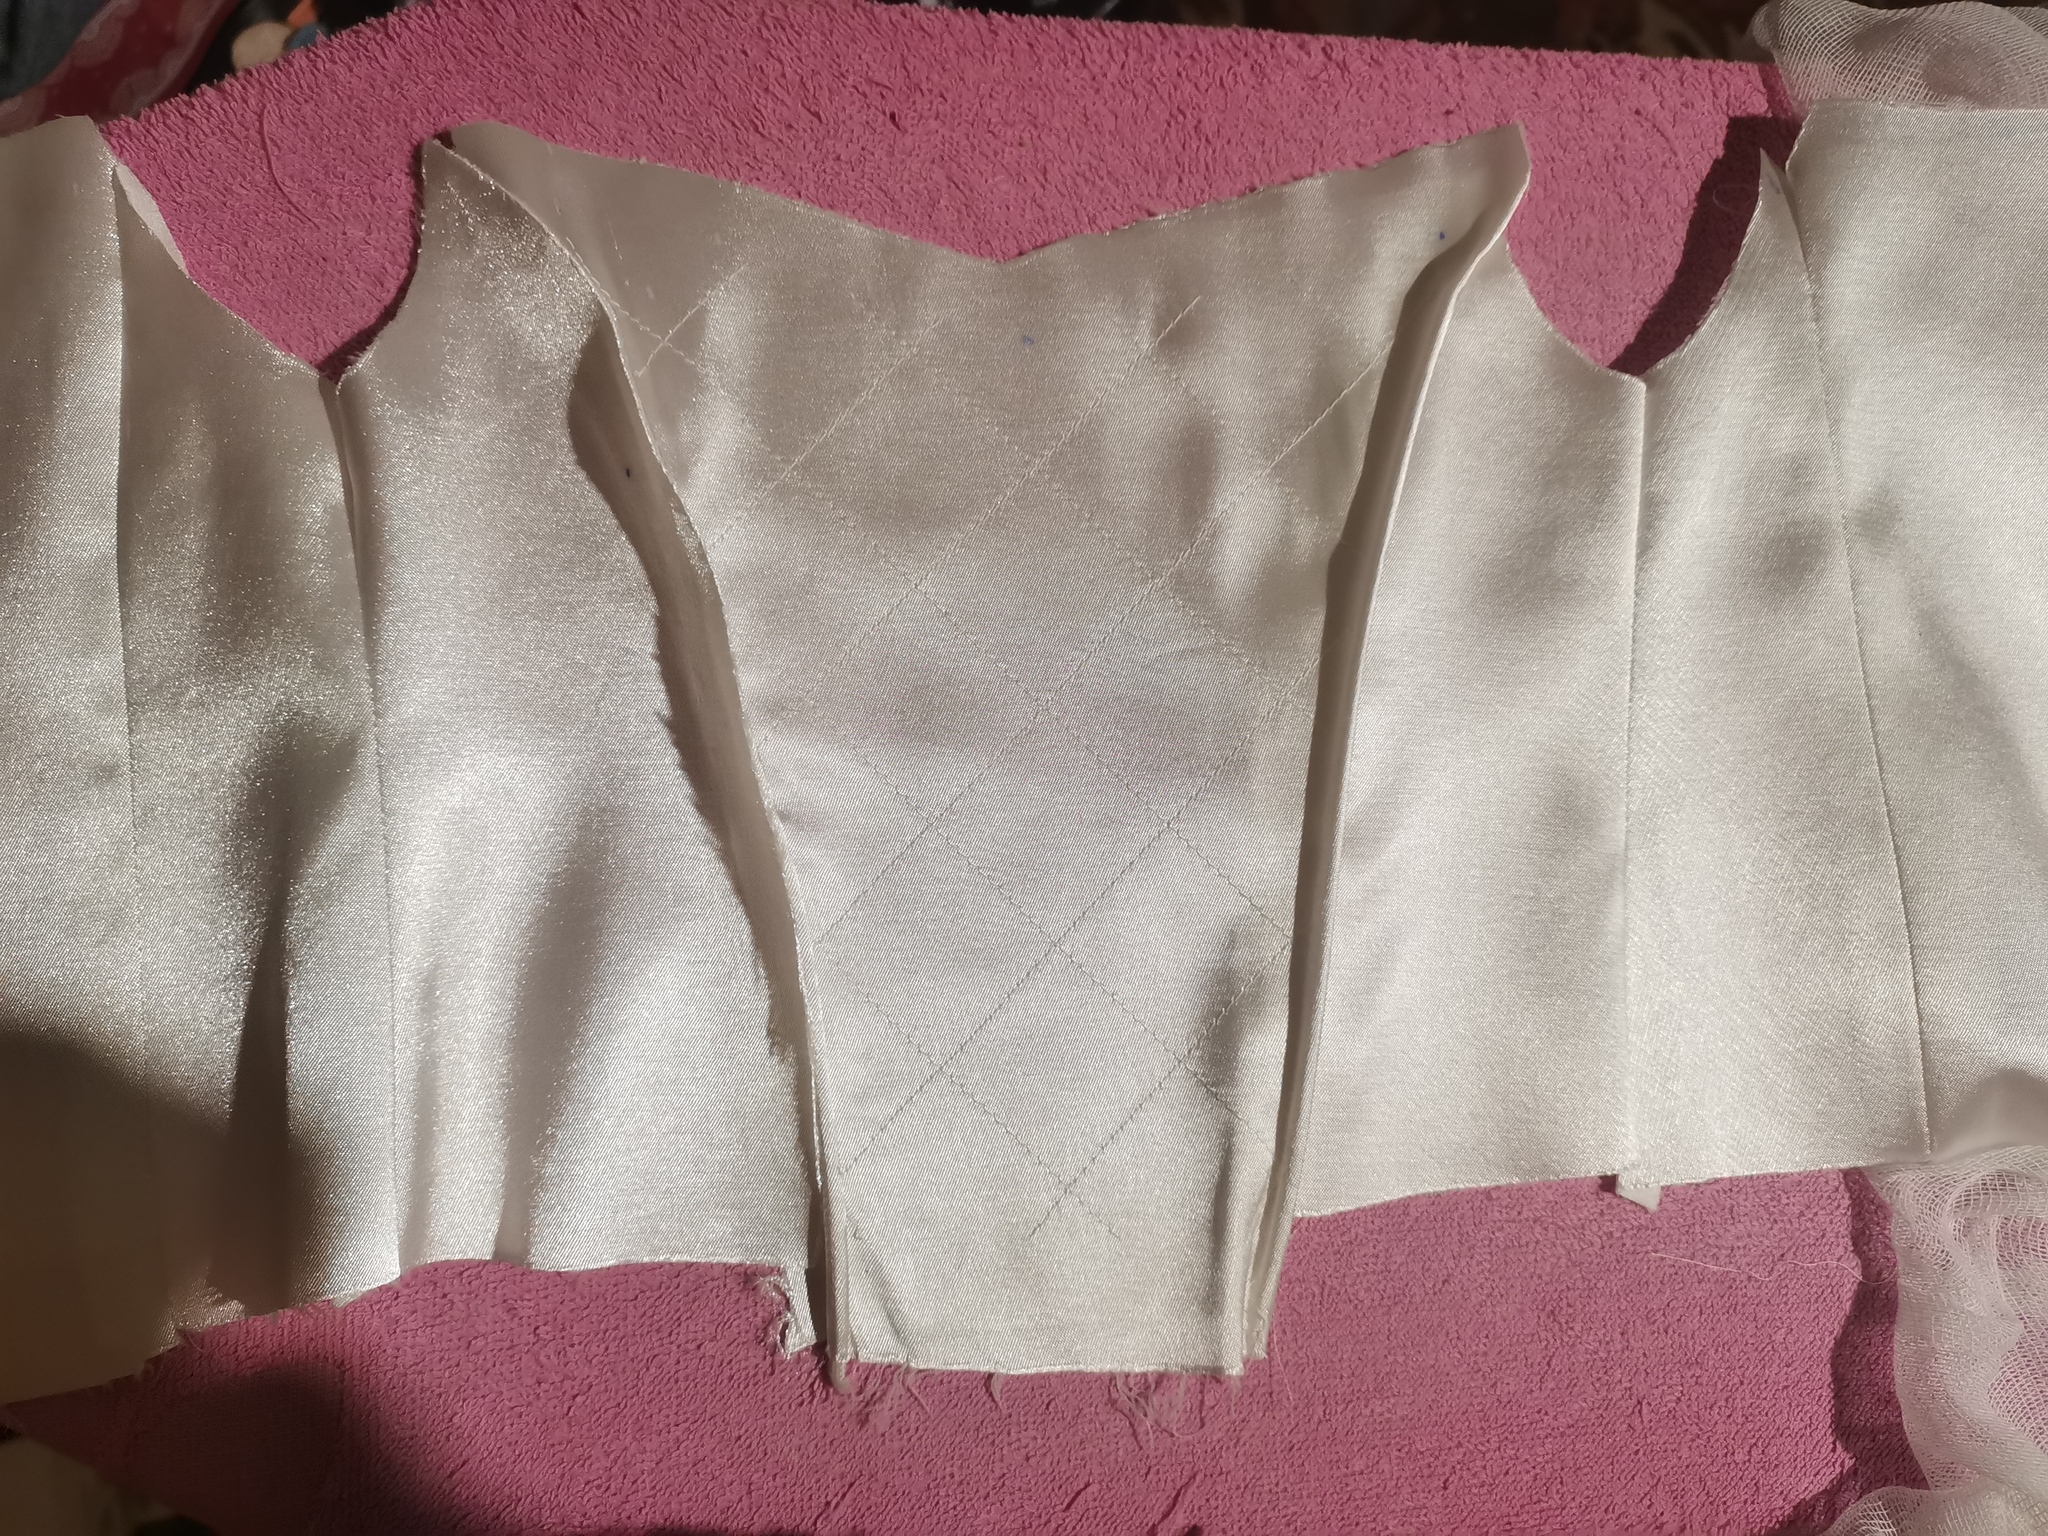 How I was a slut - Sewing, Needlework with process, Seamstress, Elegant dress, Children, Baby clothes